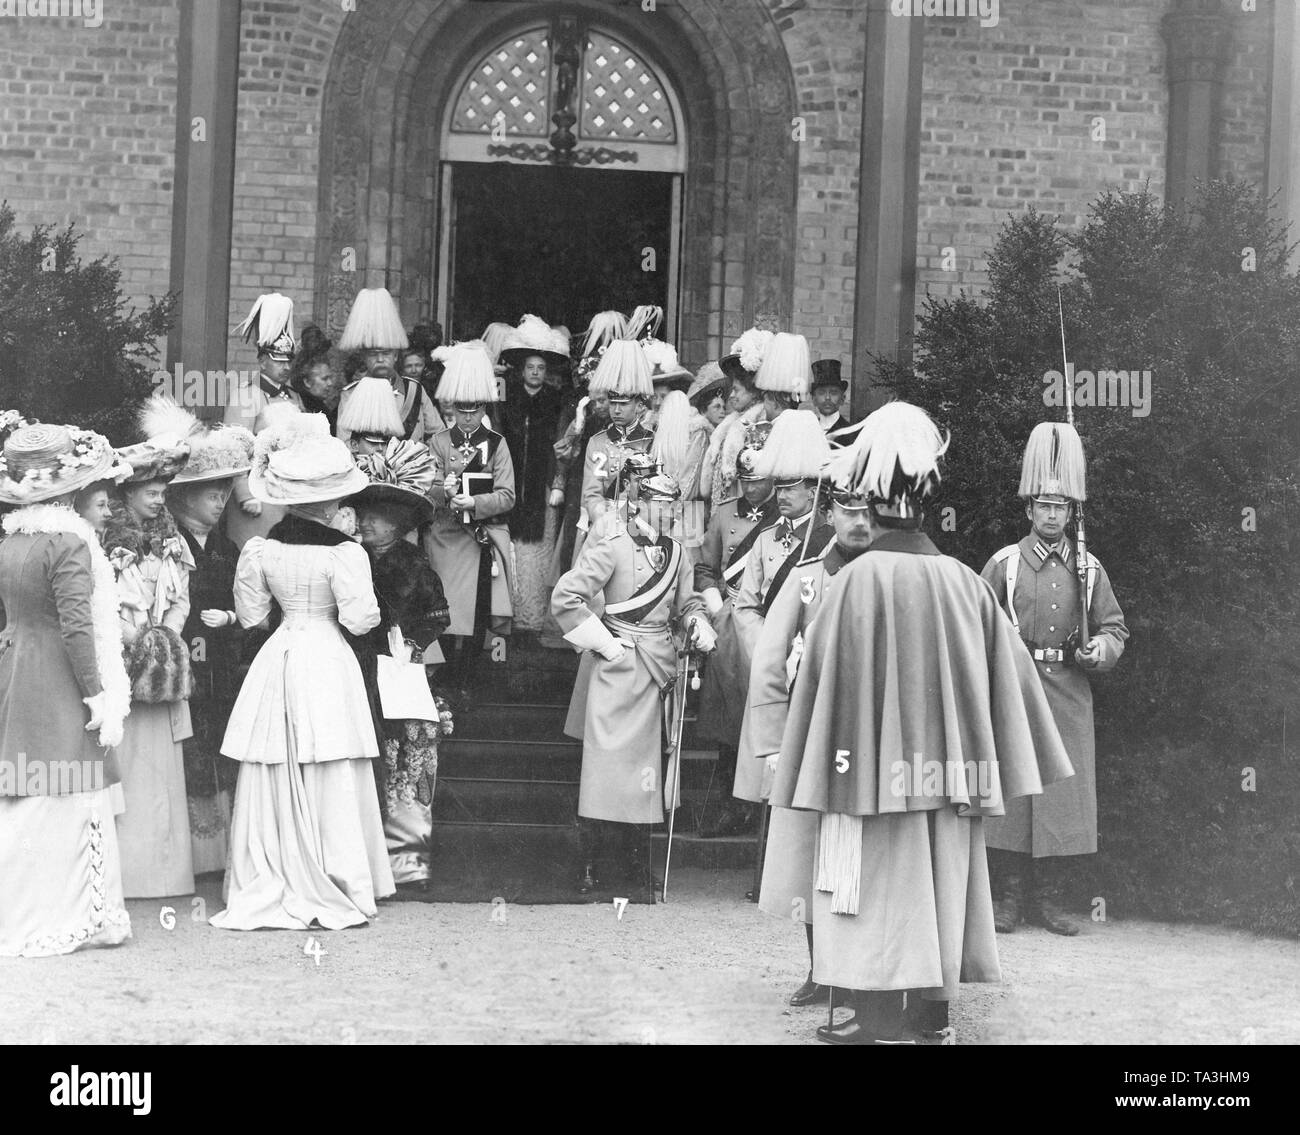 The imperial family after the confirmation of Prince Friedrich Sigismund of Prussia in front of the Peace Church in Potsdam. On the picture: Prince Friedrich Sigismund (on the stairs, 3rd man from left with book under his arm), Prince Friedrich Karl (right next to Sigismund), Crown Prince Wilhelm (standing in front of Friedrich Karl at the foot of the stairs with saber in the hand), Prince August Wilhelm (diagonally right in front of Crown Prince Wilhelm, facing the viewer) in conversation with Emperor Wilhelm II (standing with his back to the viewer). On the right side of the picture stands Stock Photo